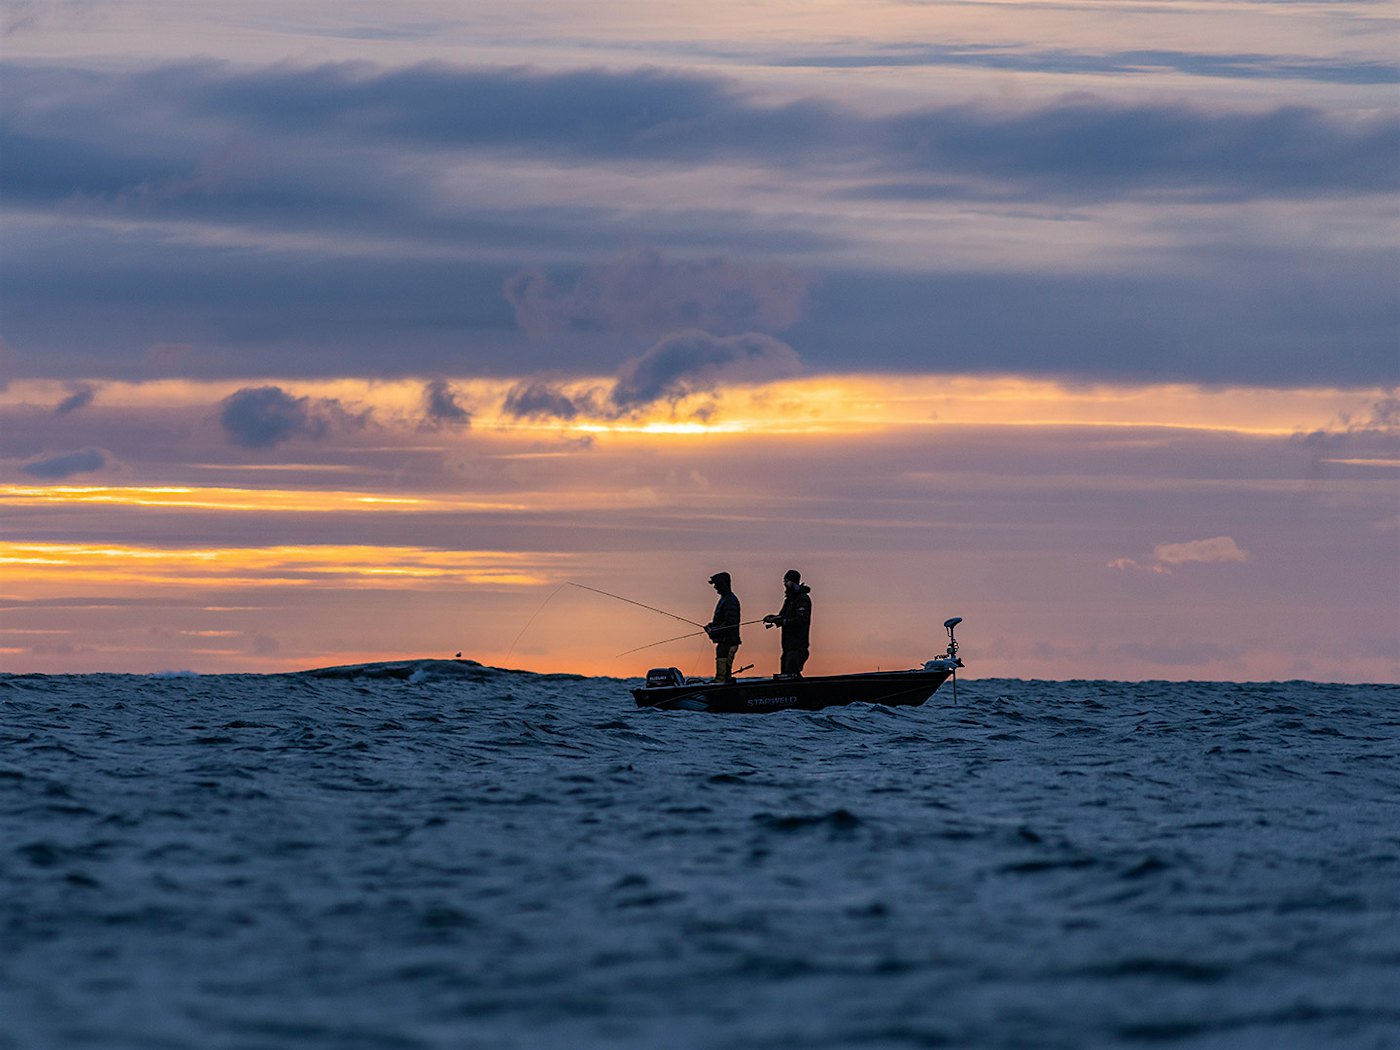 Small boat on the sea, with two fishermen at sunset. Photo